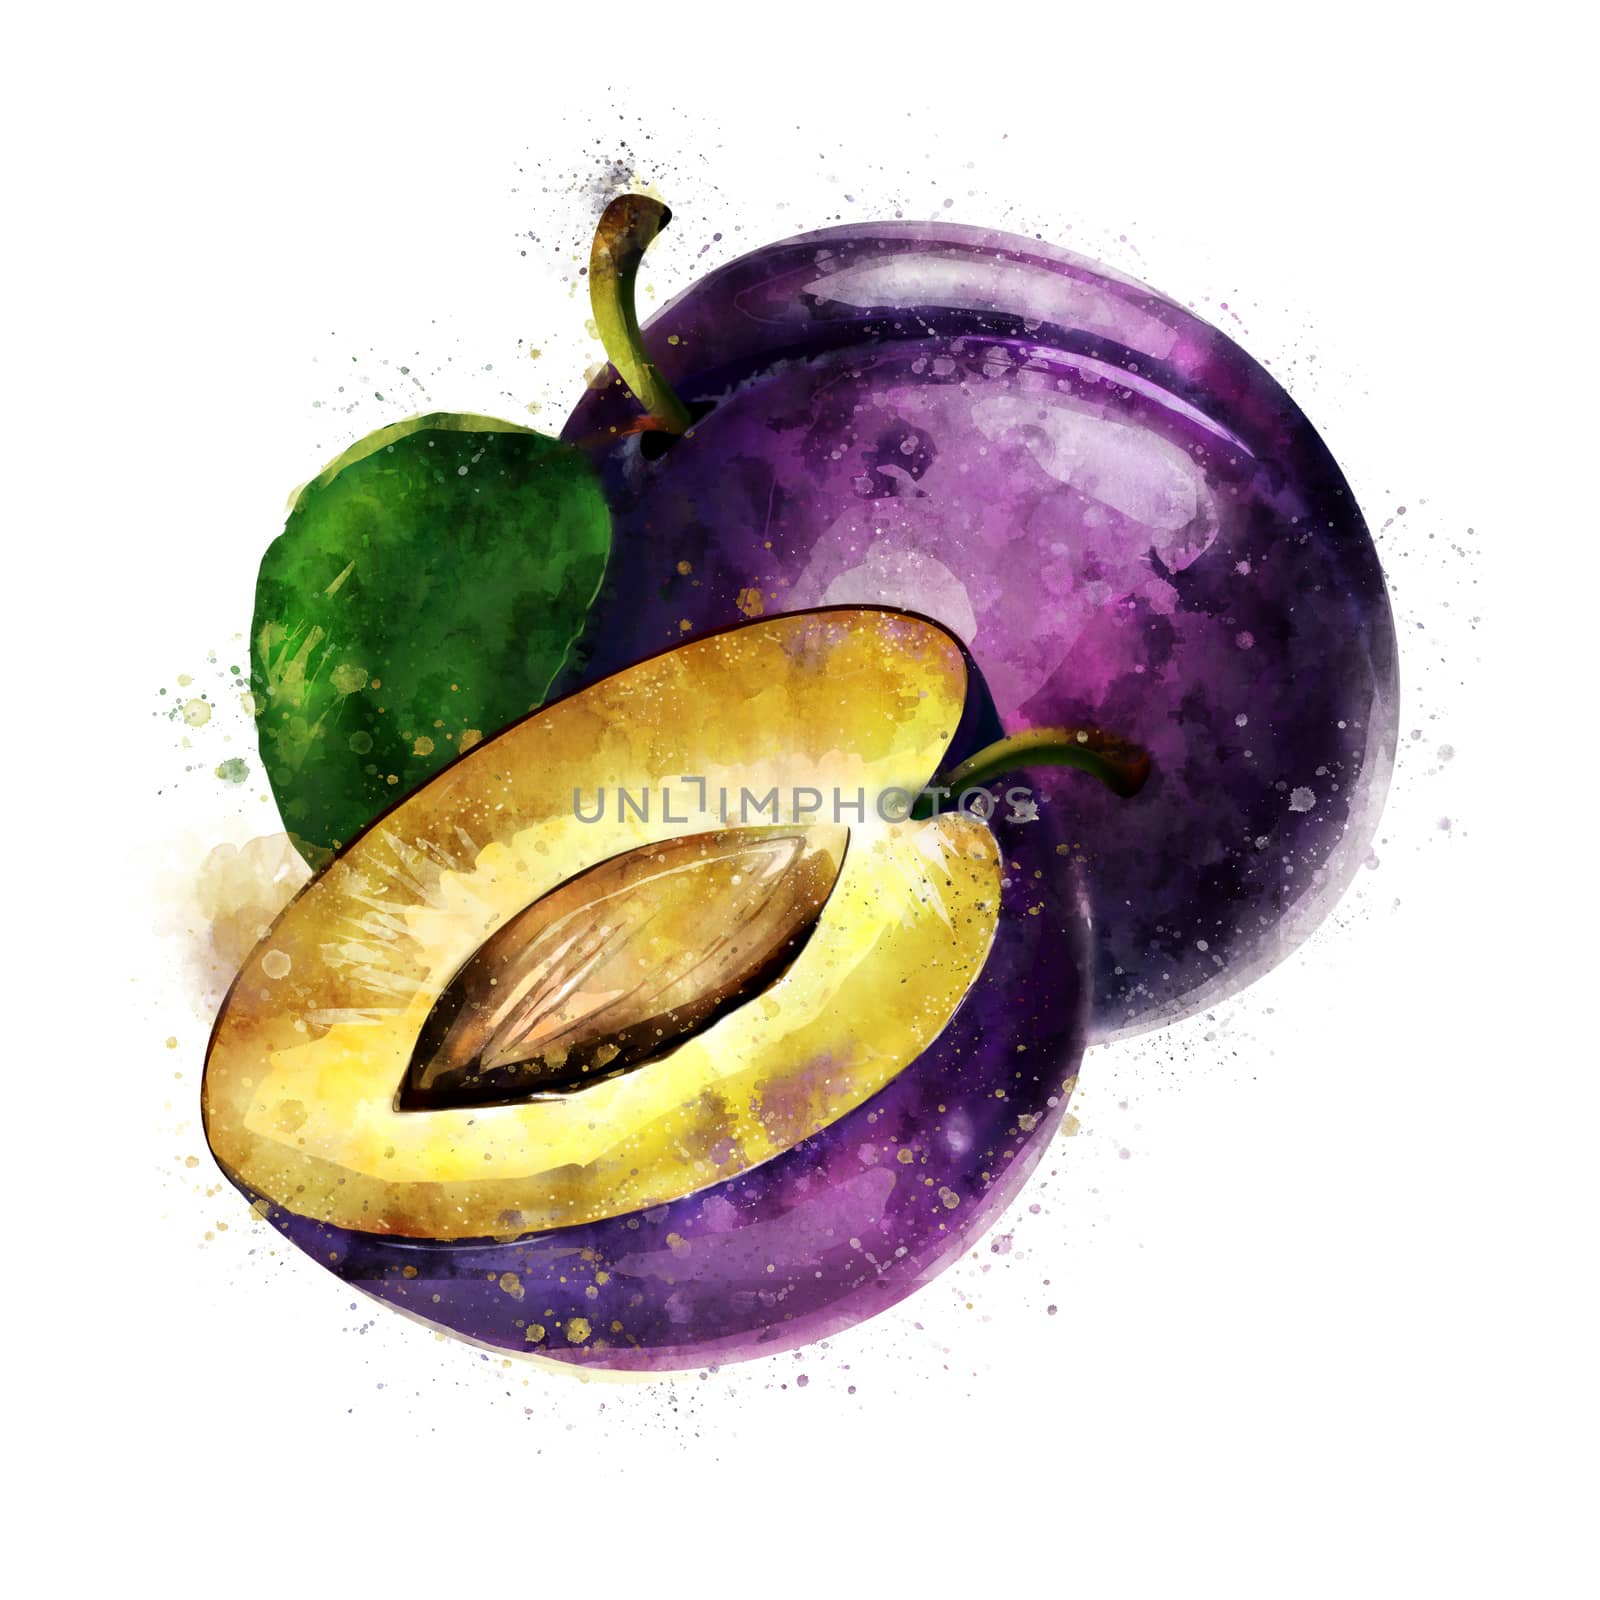 Plum on white background. Watercolor illustration by ConceptCafe